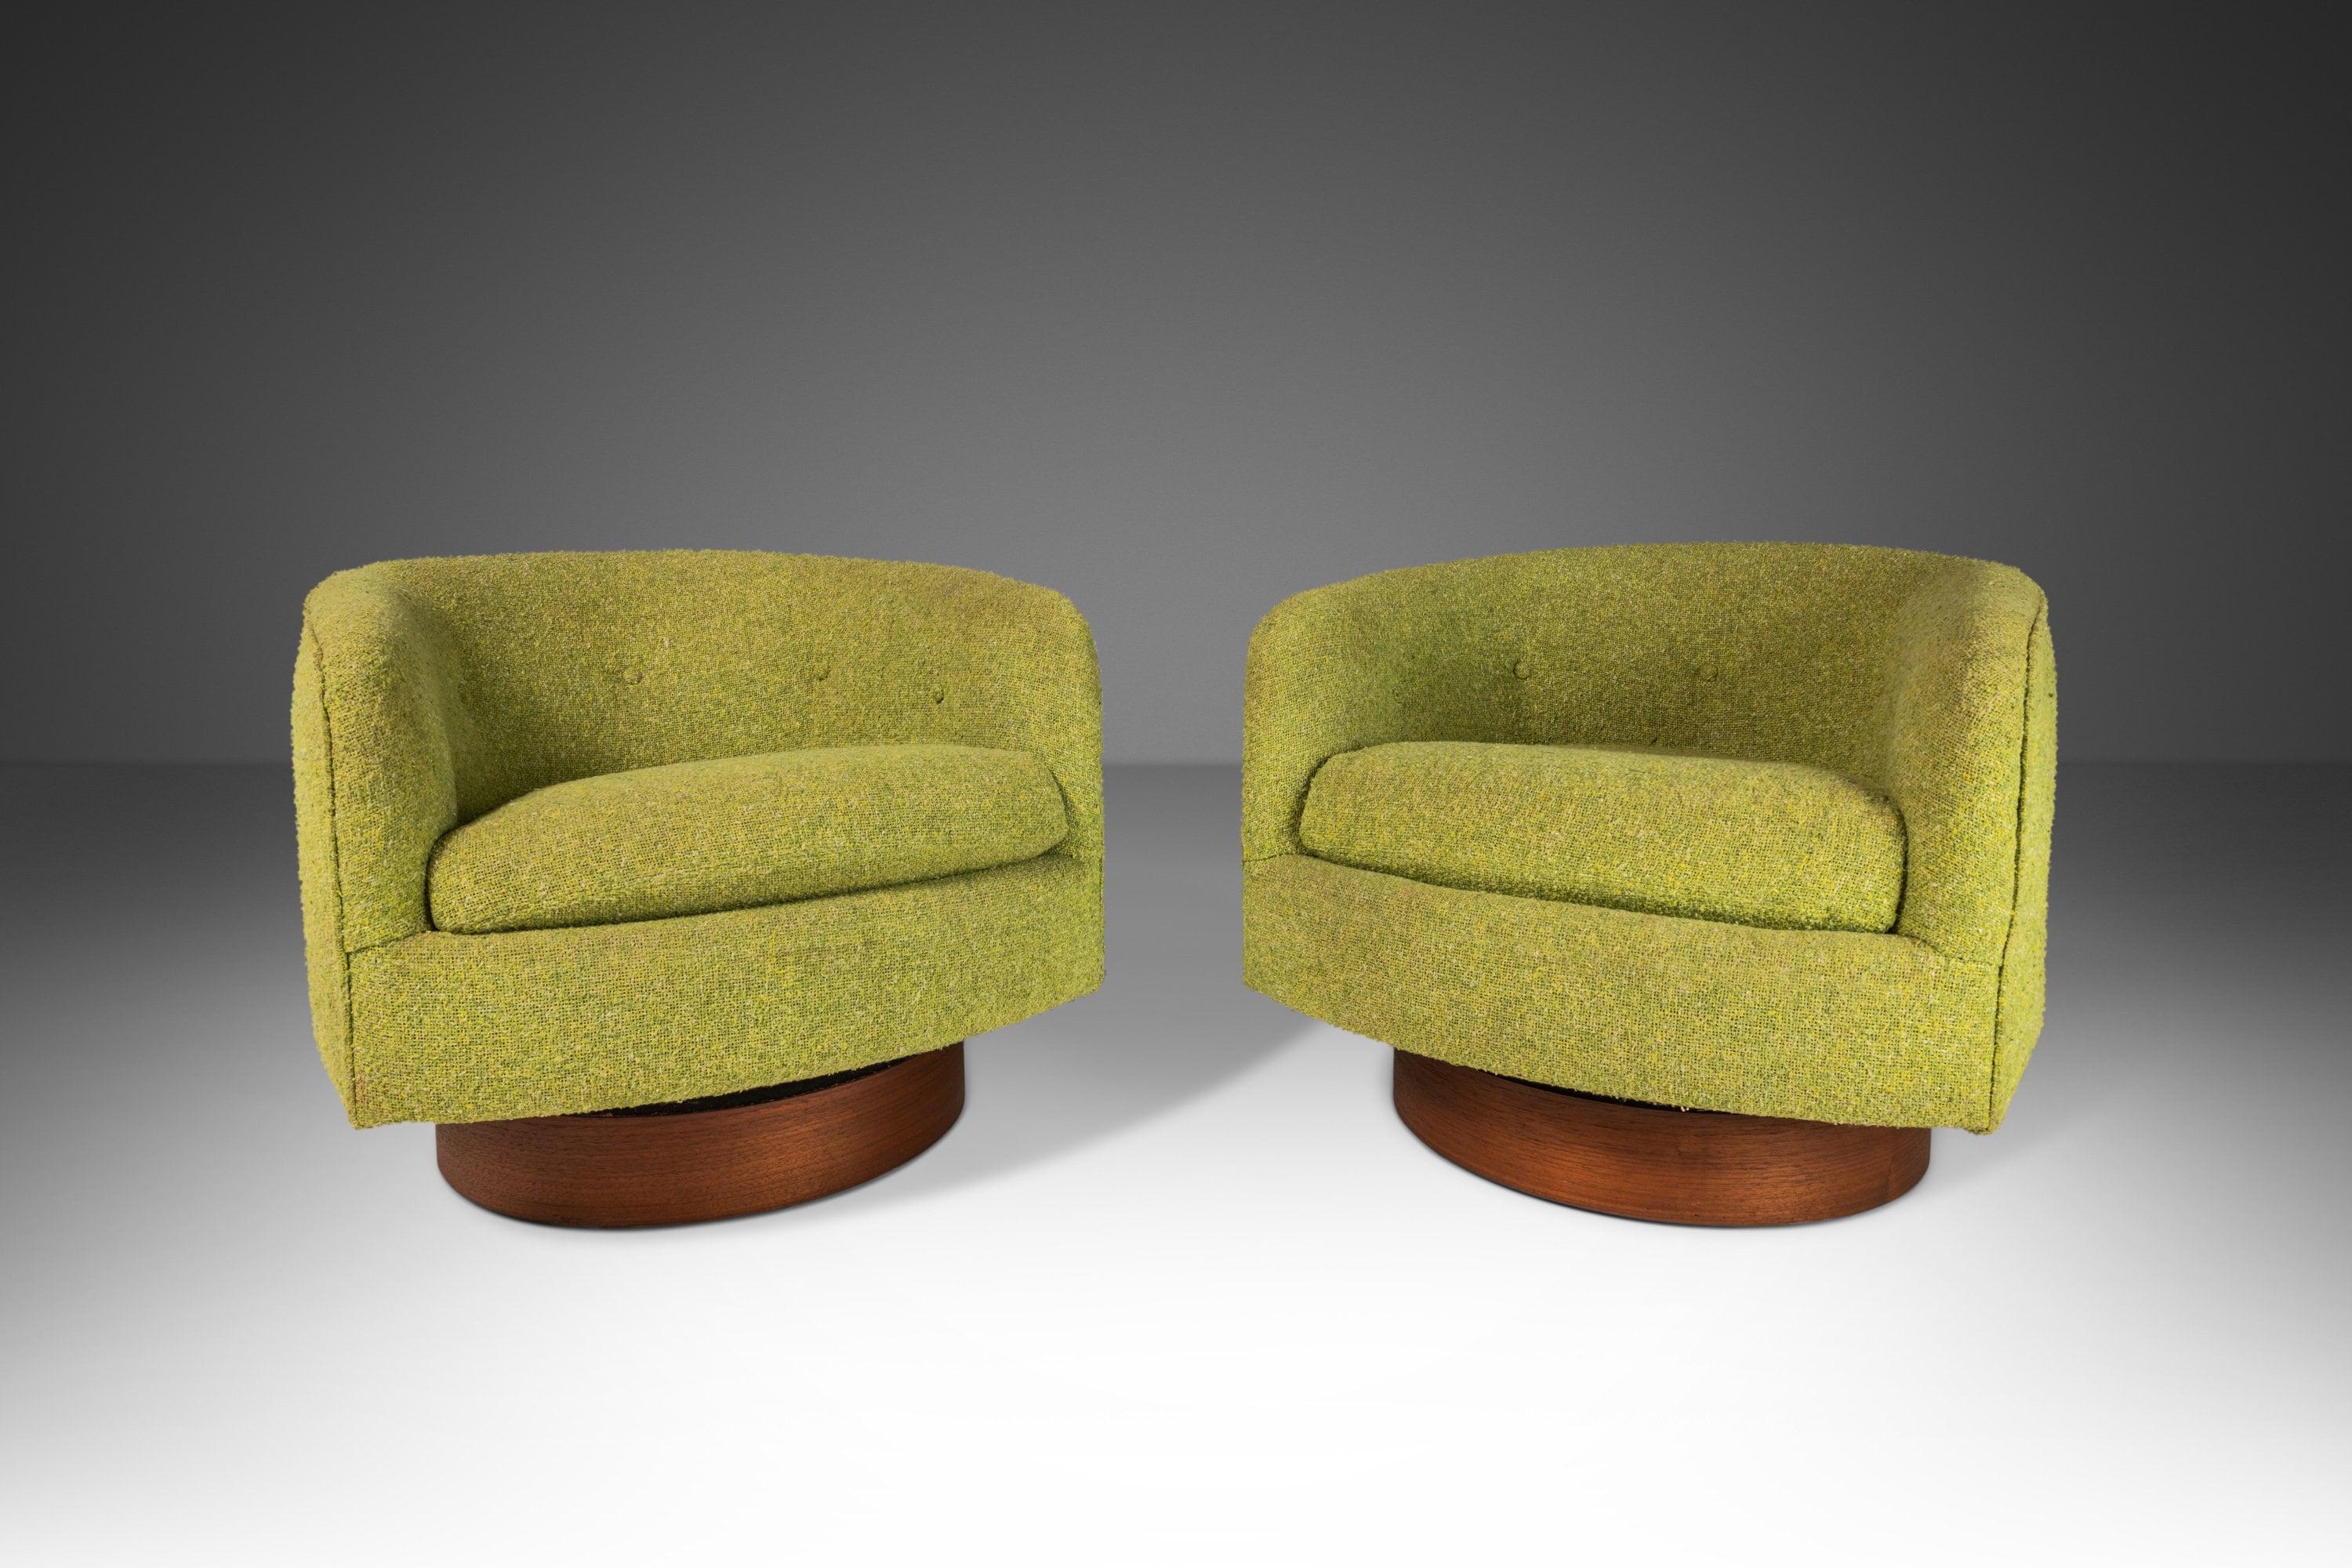 Handsome pair of swivel chairs by Milo Baughman. In stunning original lime-green tweed upholstery and resting on a medium walnut base. Extremely comfortable and classic design. Perfect in a home, office or studio setting against a multitude of